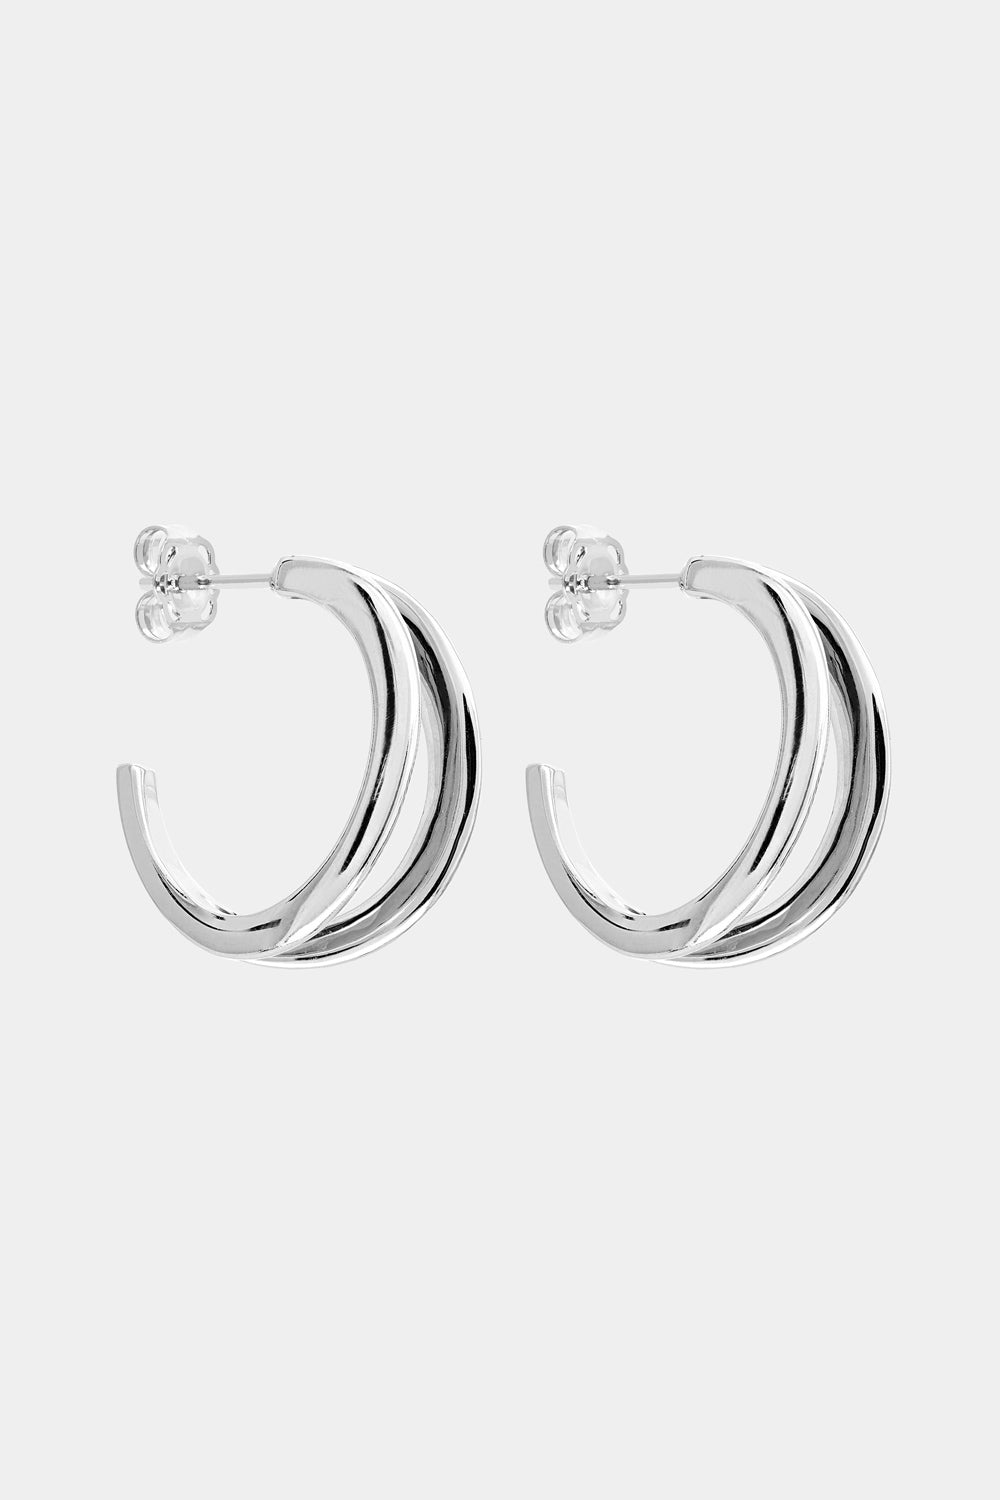 Double Band Hoops | Silver or 9K White Gold